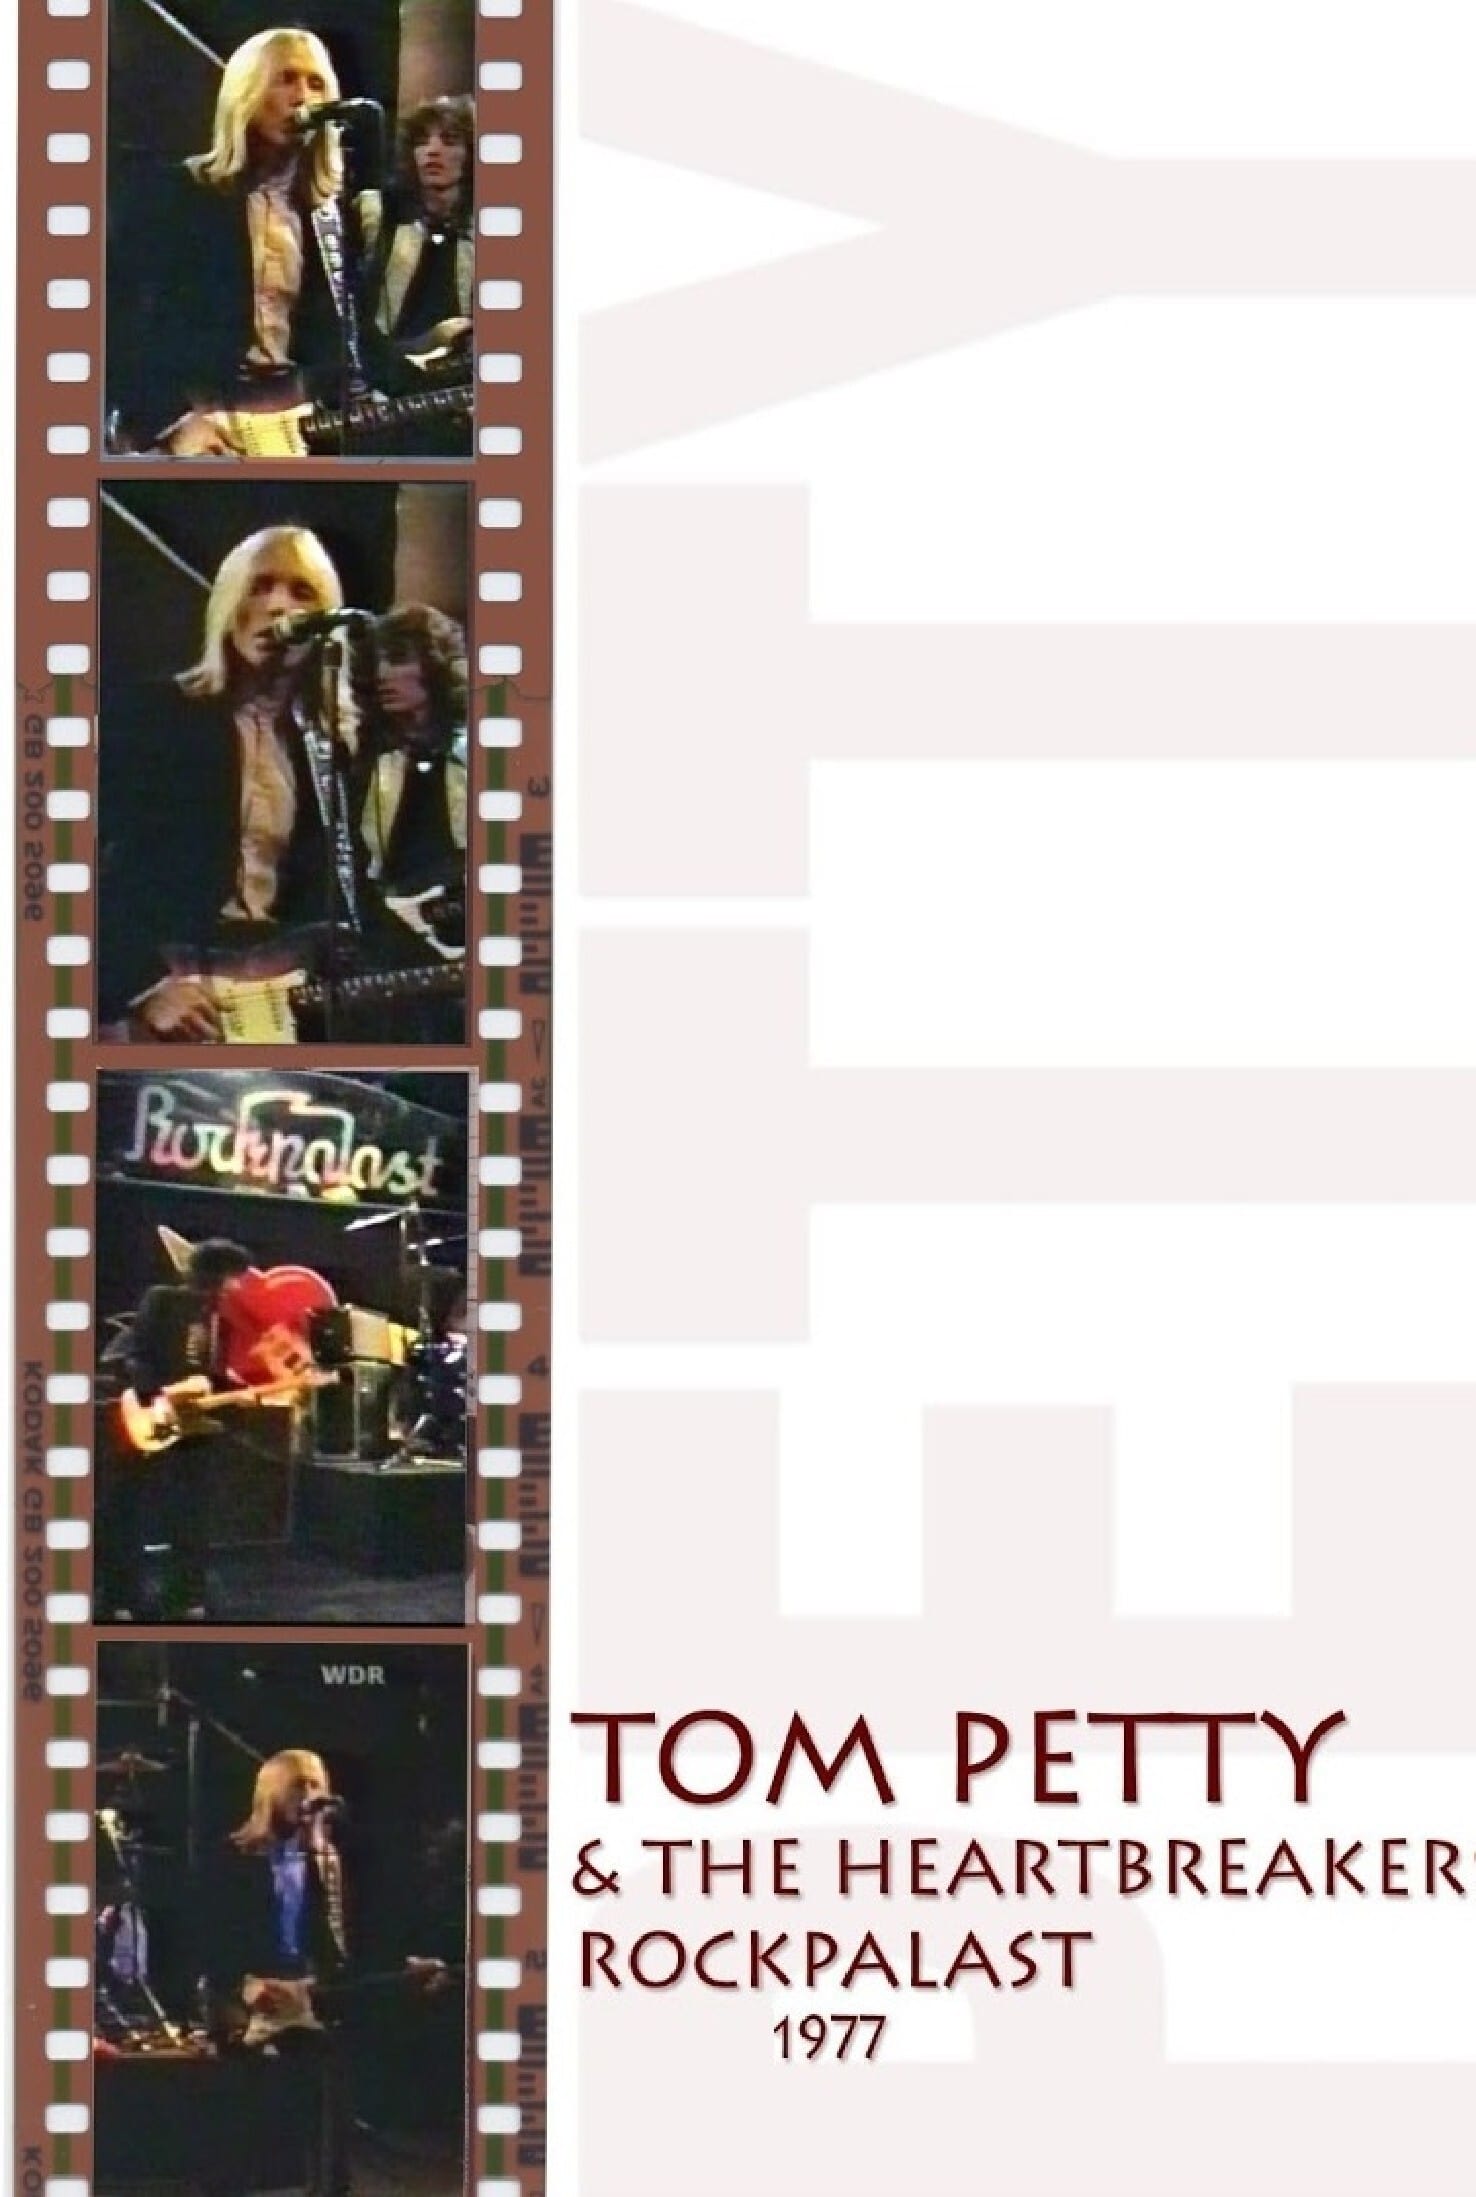 Tom Petty & The Heartbreakers: Live at Rockpalast